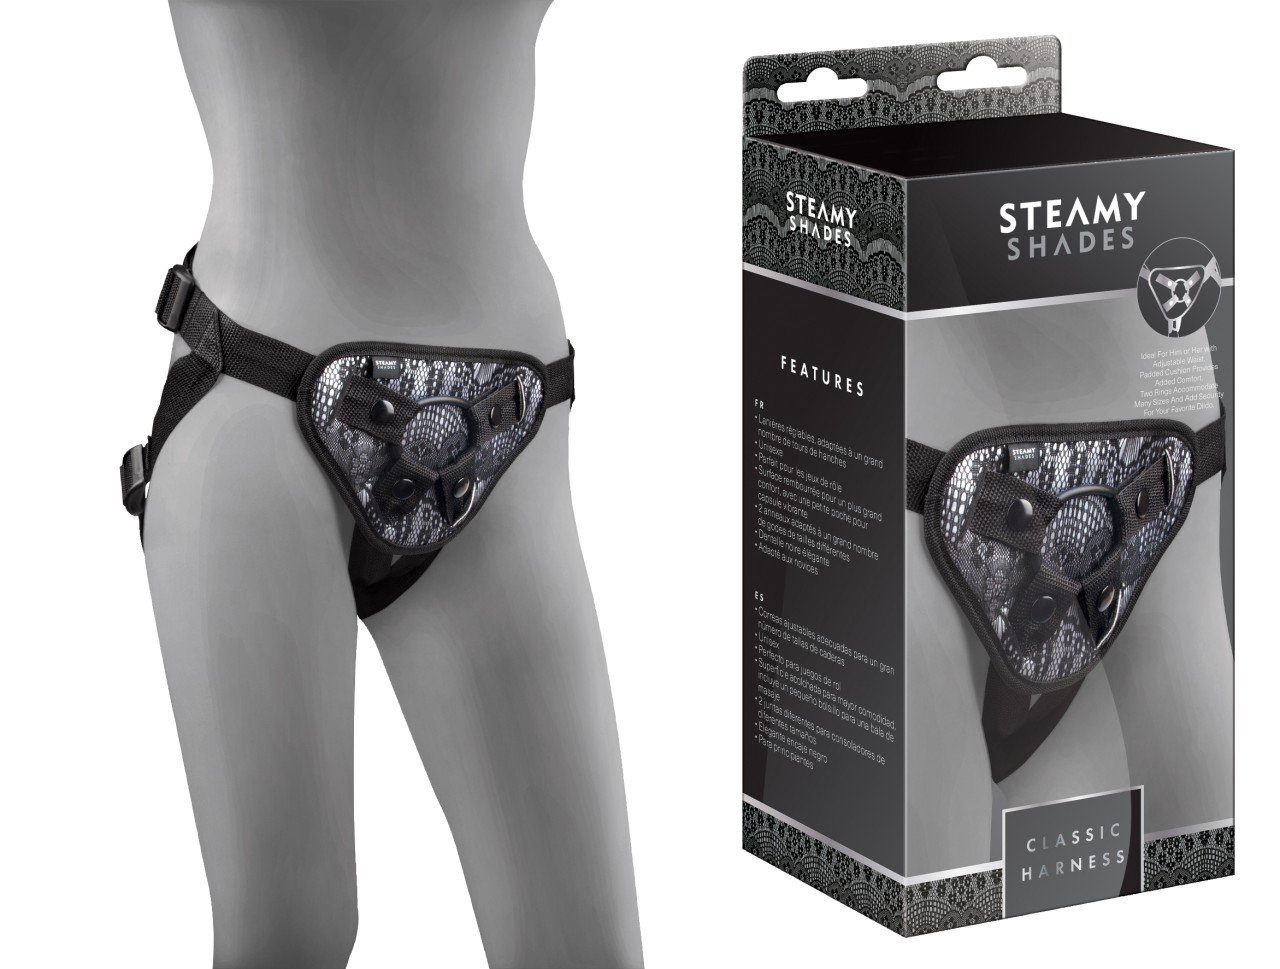 STEAMY SHADES Strap-on-Dildo STEAMY SHADES Classic Harness